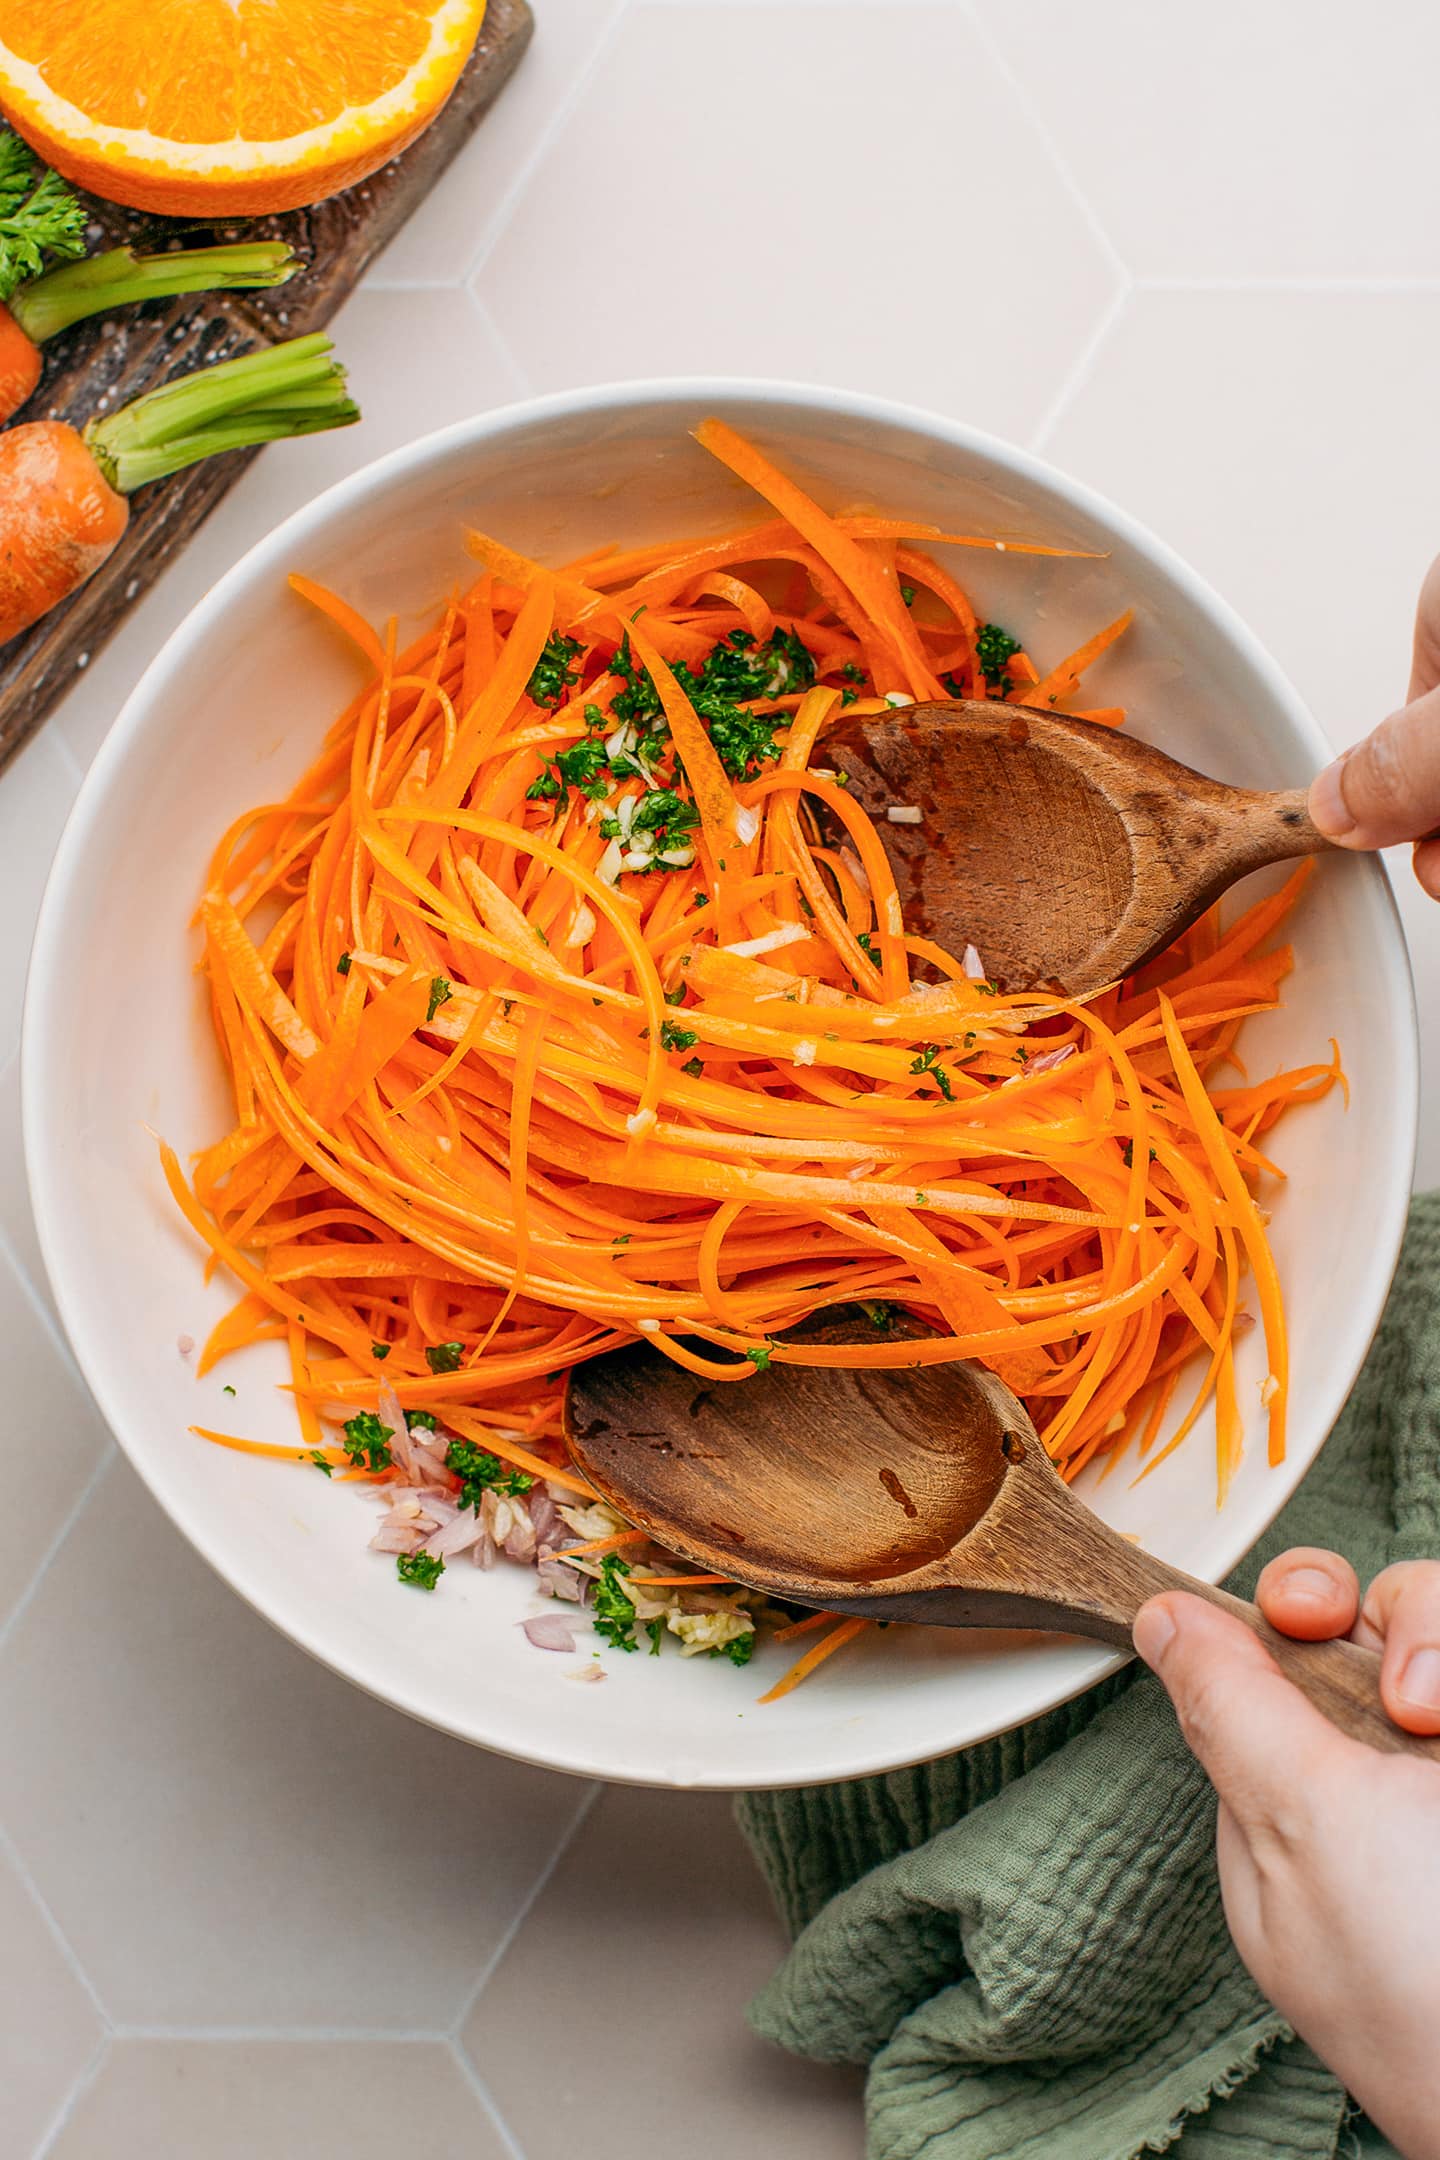 Tossing grated carrots with parsley and olive oil.